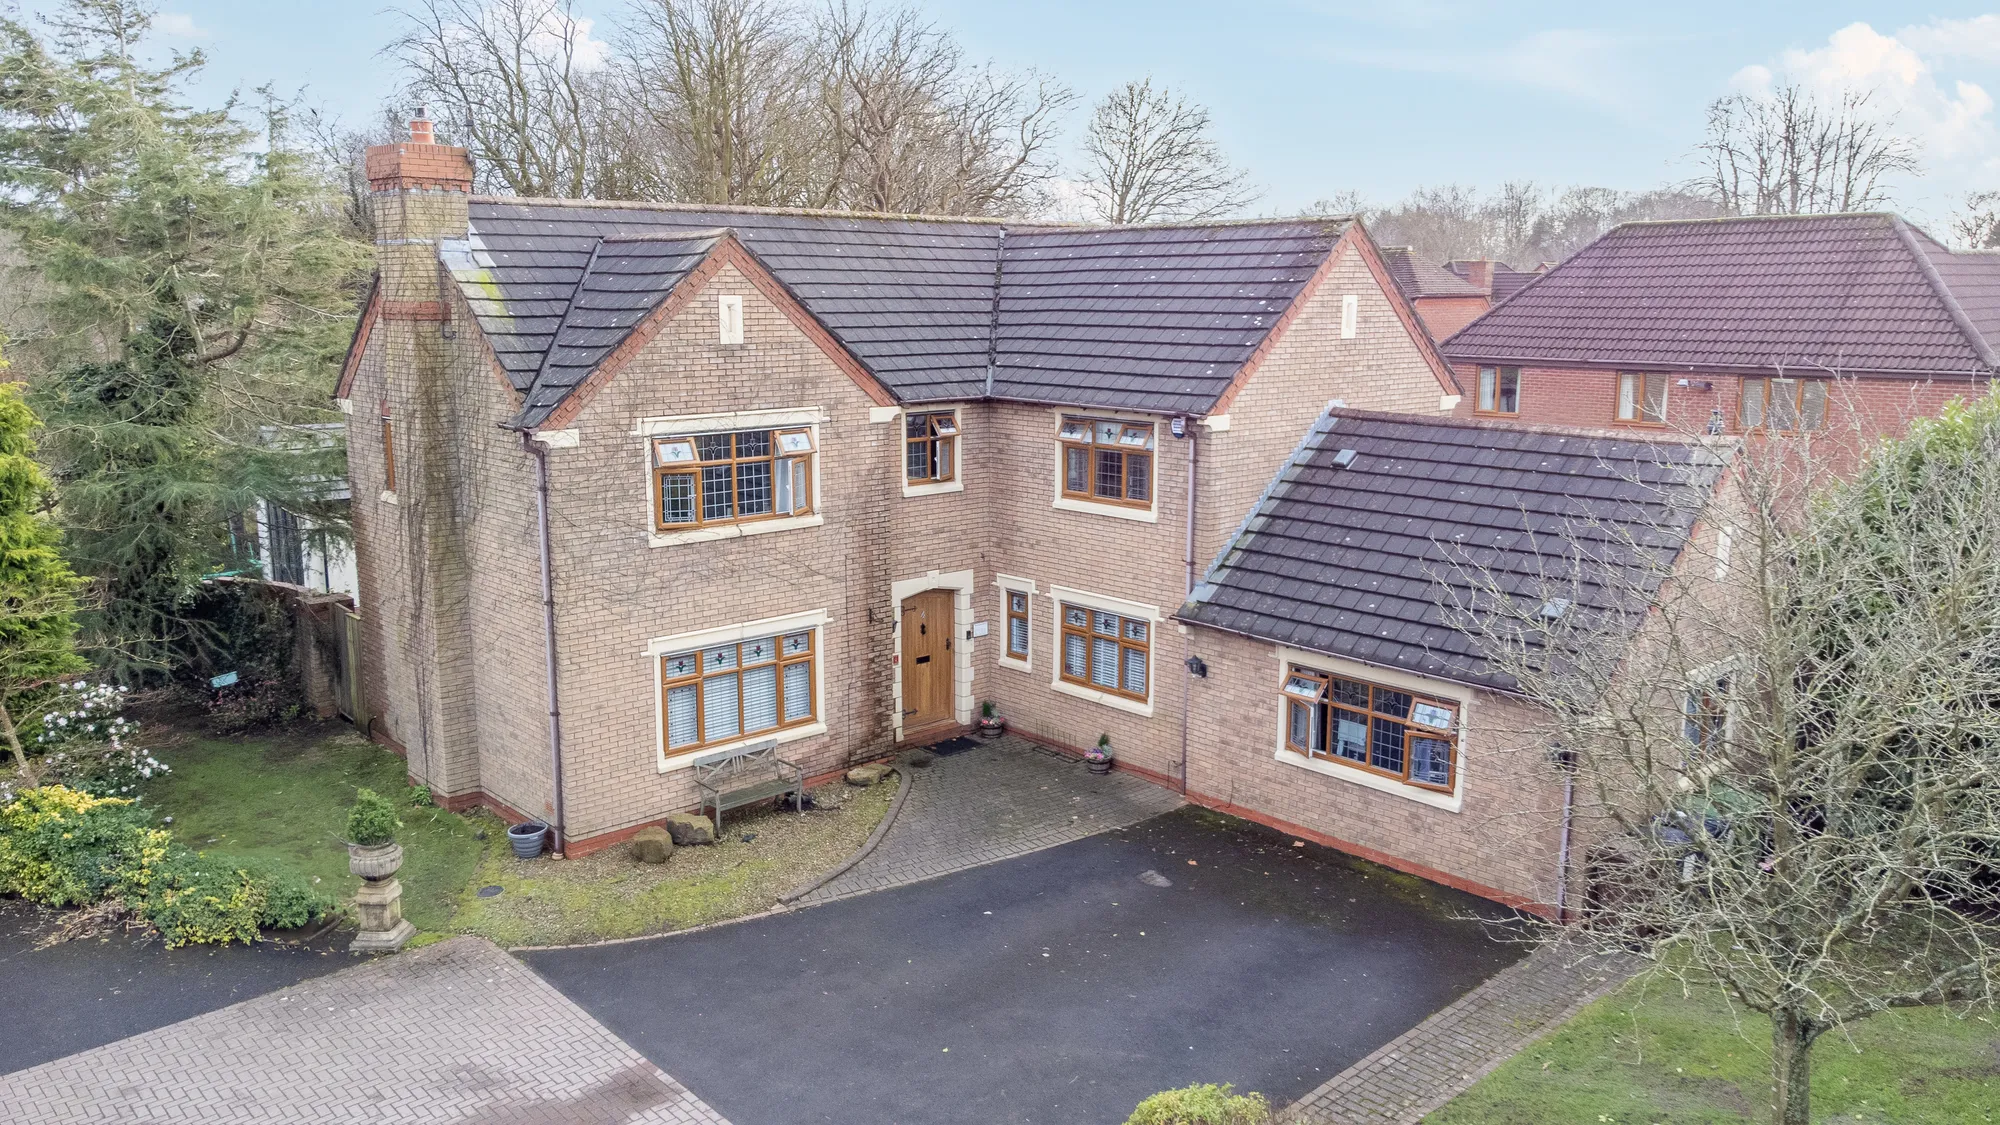 Wow, just look at that floorplan and video - what a place!!! Welcome to Chilton Mews – the ultimate hotspot in Maghull! Imagine a swanky executive-style pad with its very own hidden gem – a detached annexe in the garden, complete with a beautifully finished bar, WC, and a reception area.